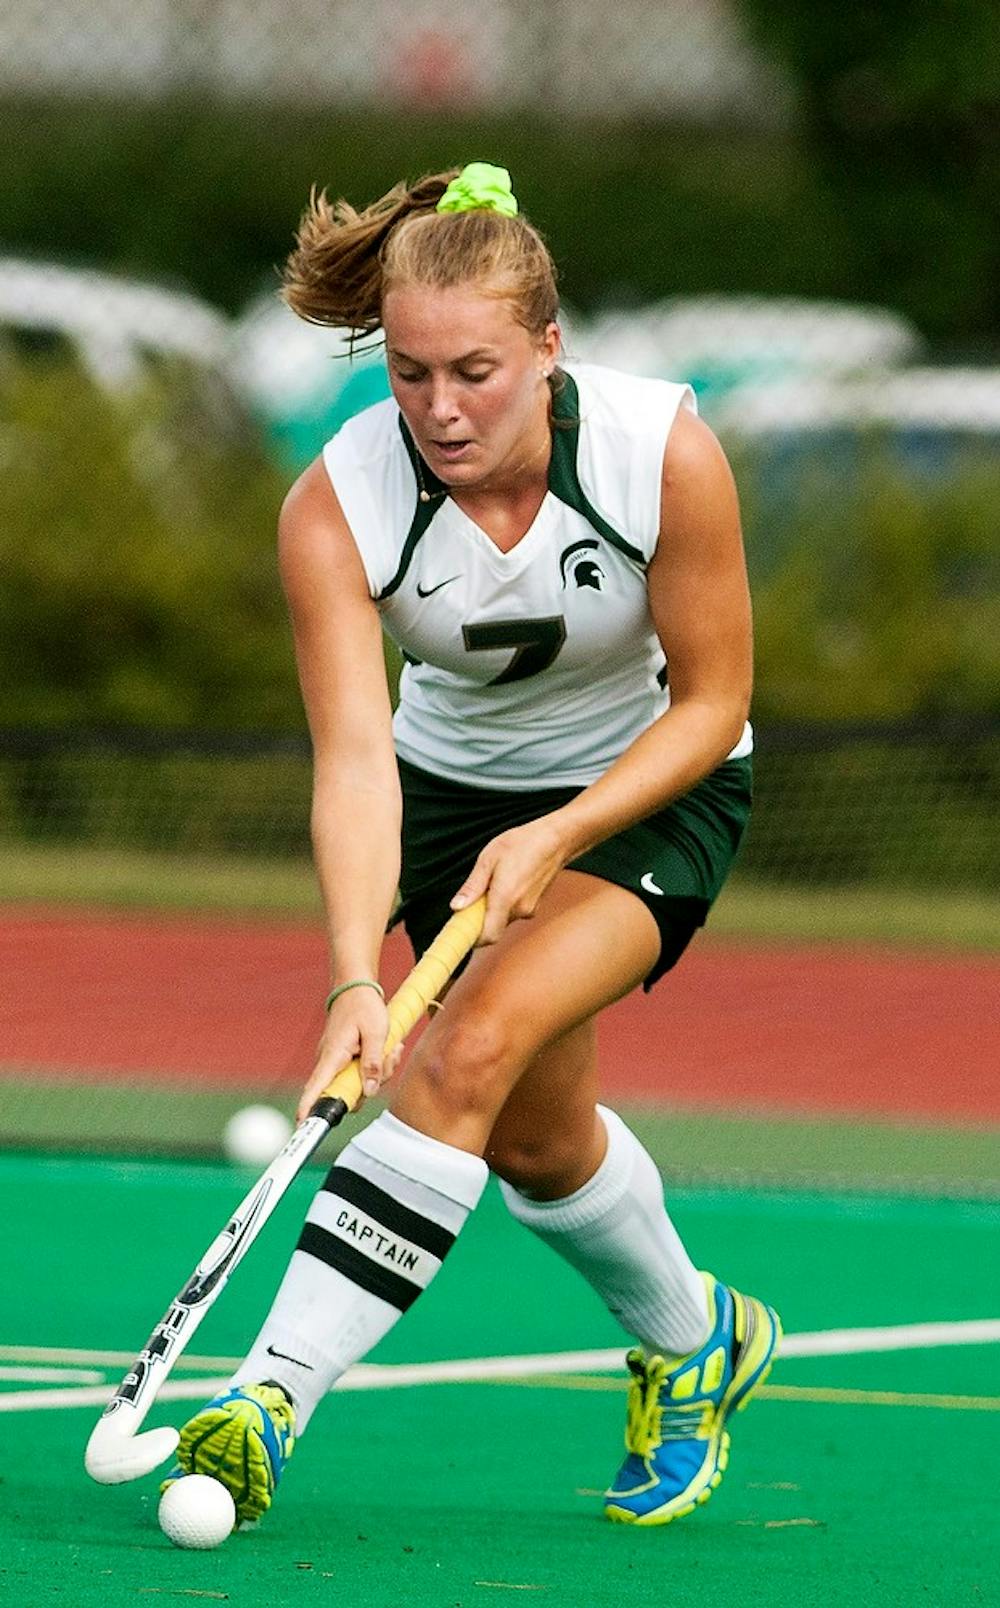 <p>Senior midfield Heather Howie dribbles the ball during a game against the University of Maine Aug. 31, 2014, at Ralph Young Field. The Spartans defeated the Black Bears, 5-4 in overtime. Jessalyn Tamez/The State News </p>